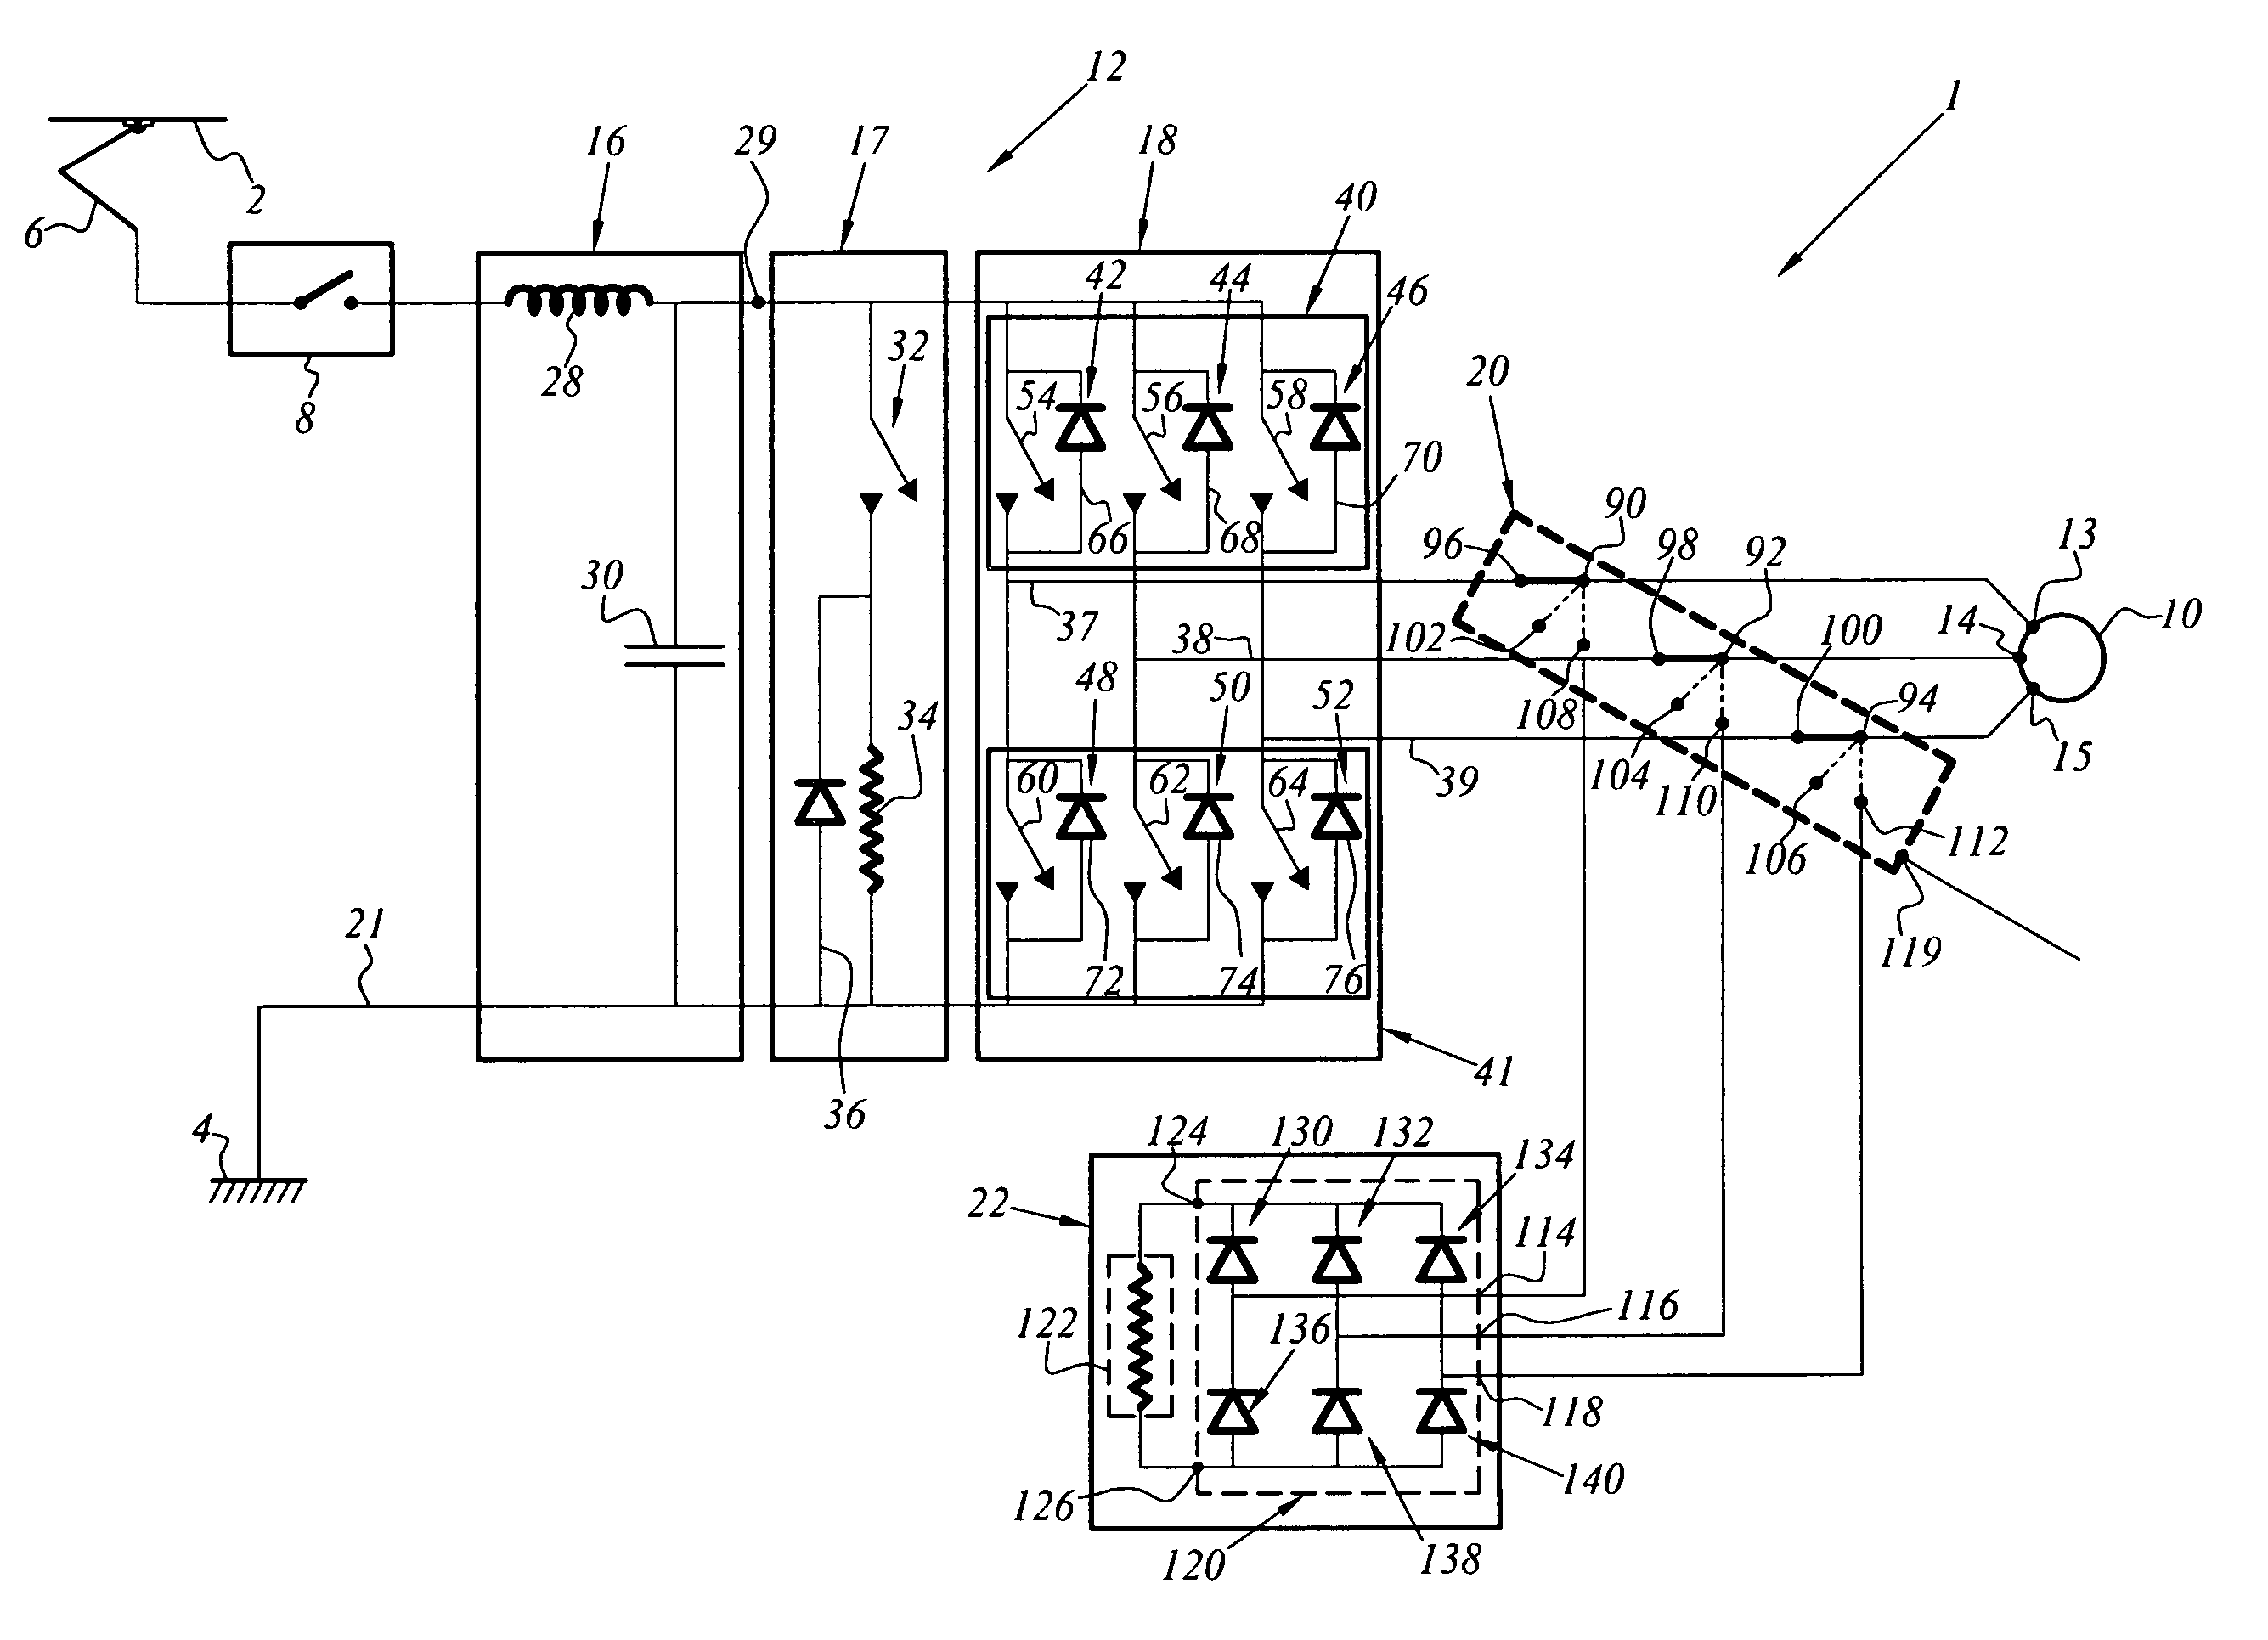 Rheostatic safety braking device having a bipolar resistive assembly with permanent magnet motor